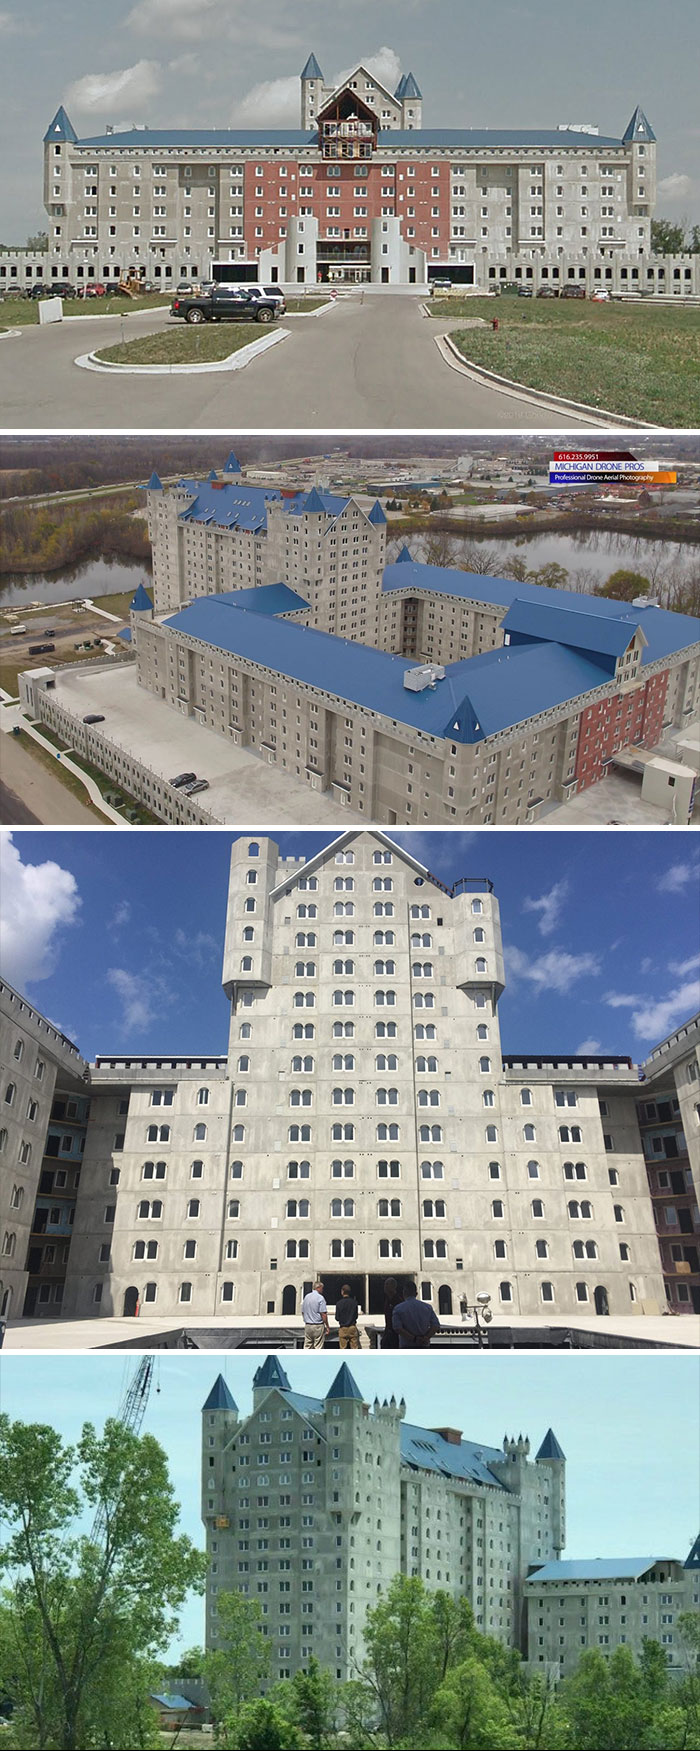 The Grand Castle Apartment Building In Grandville Michigan. Contains 520 Units, And A Design Based Off Of Neuschwanstein Castle. It Is The Second Largest Castle Structure In The World. More Details In Comments